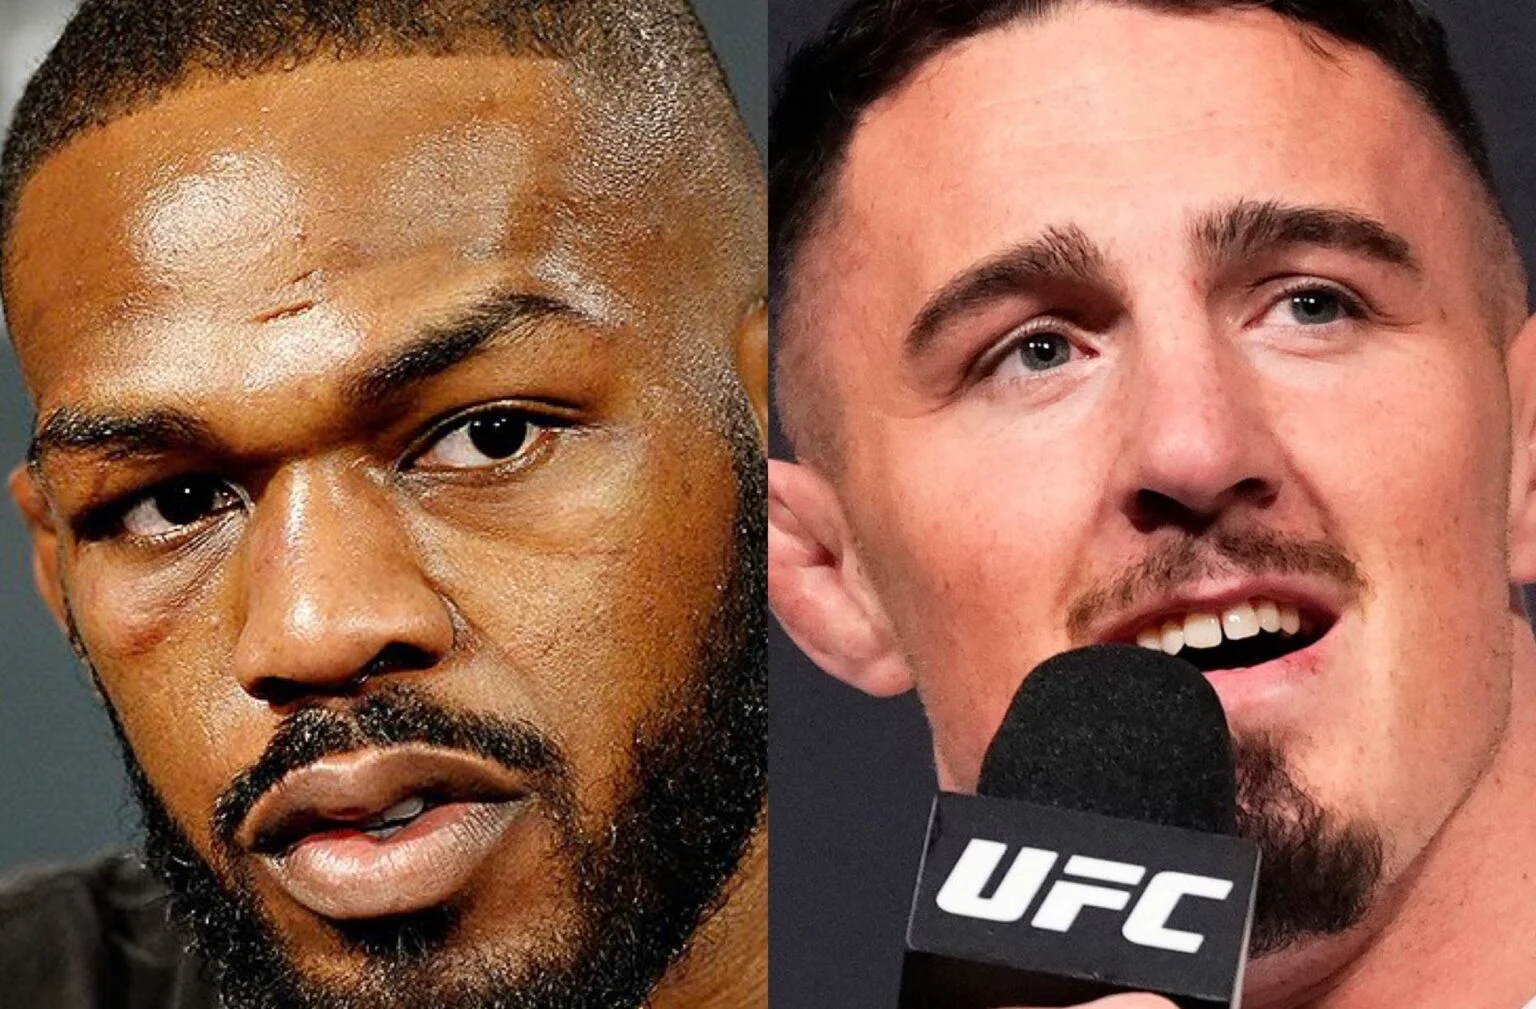 Aspinall Reacts To Bisping’s Comments About Beating Jon Jones